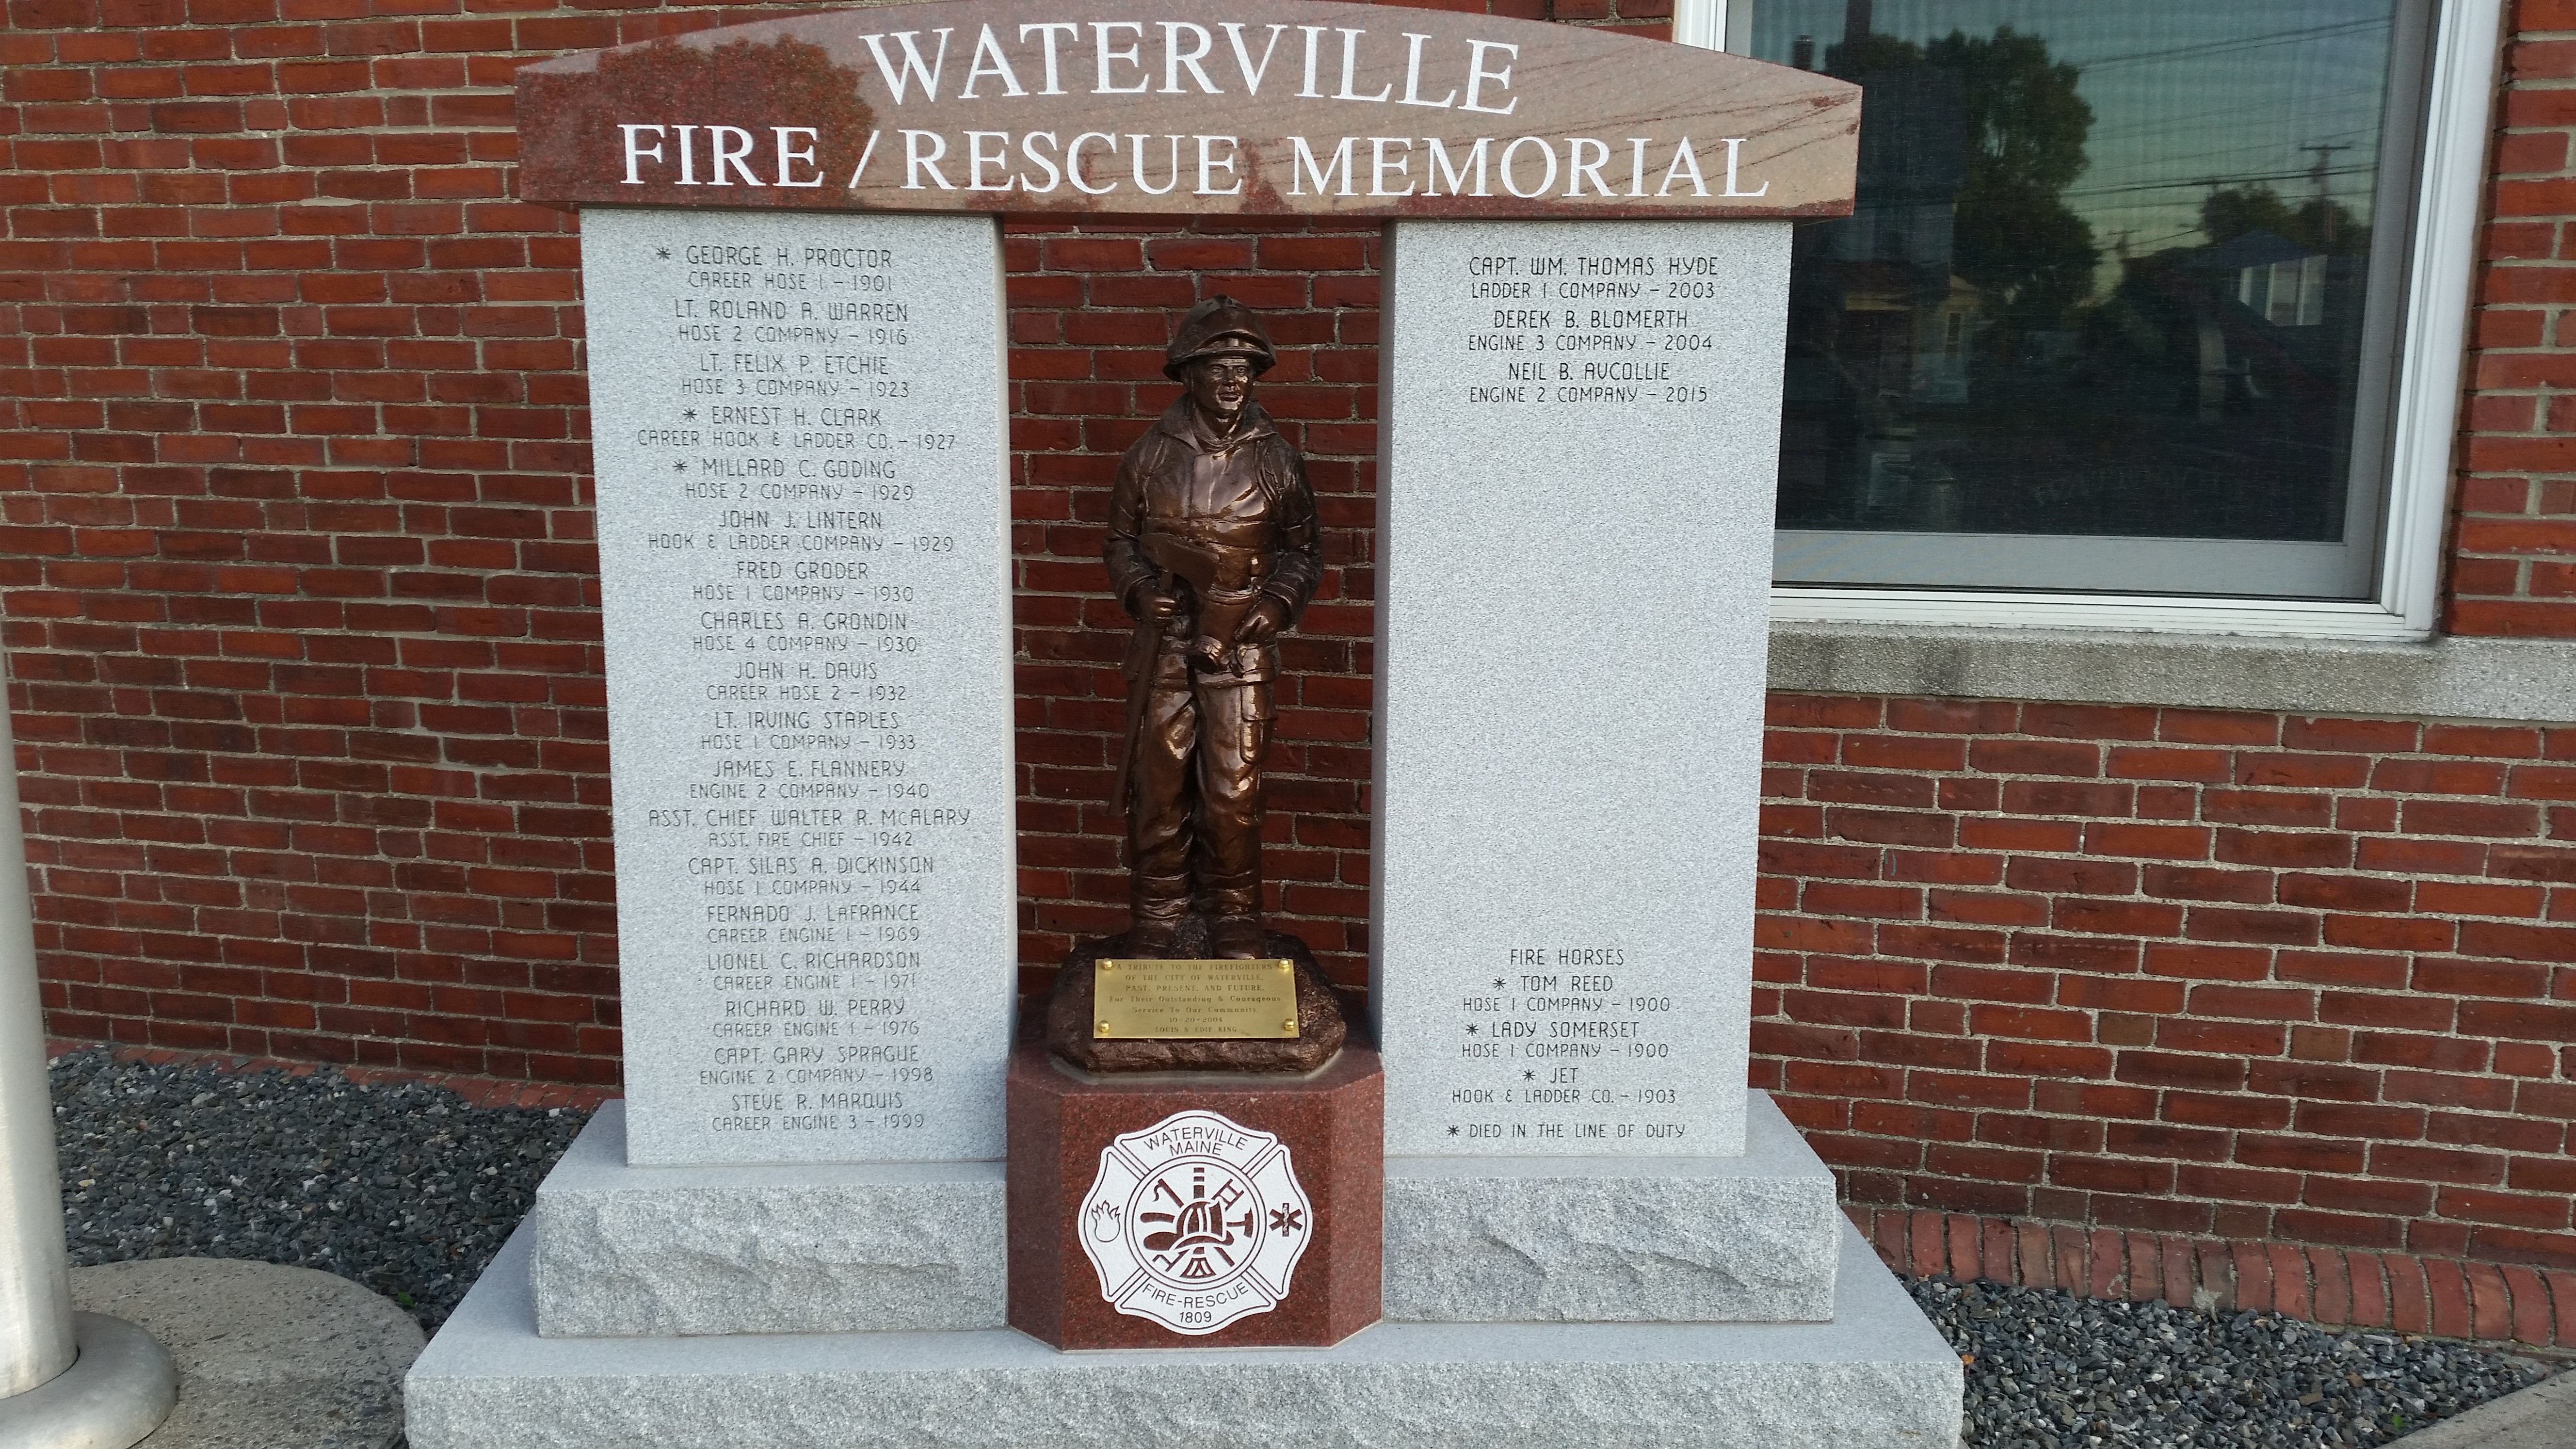 Picture of the Waterville Fire/Rescue Memorial